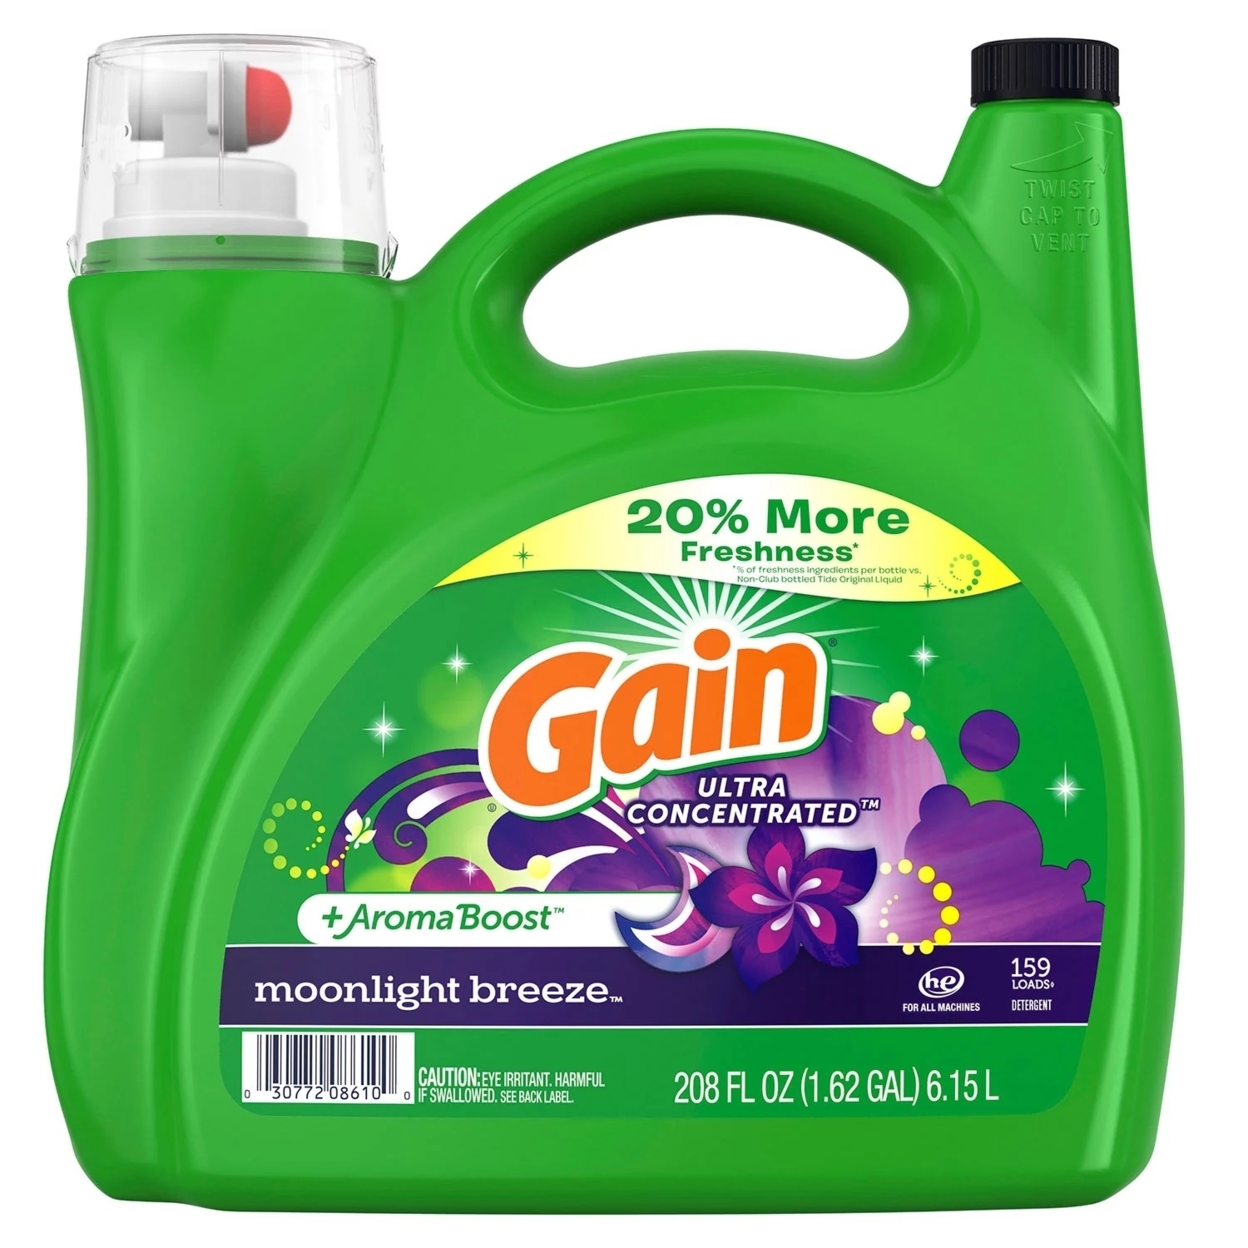 Gain Ultra Concentrated+ Aroma Detergent, Moonlight Breeze (208 Fl Oz, 159 Load)